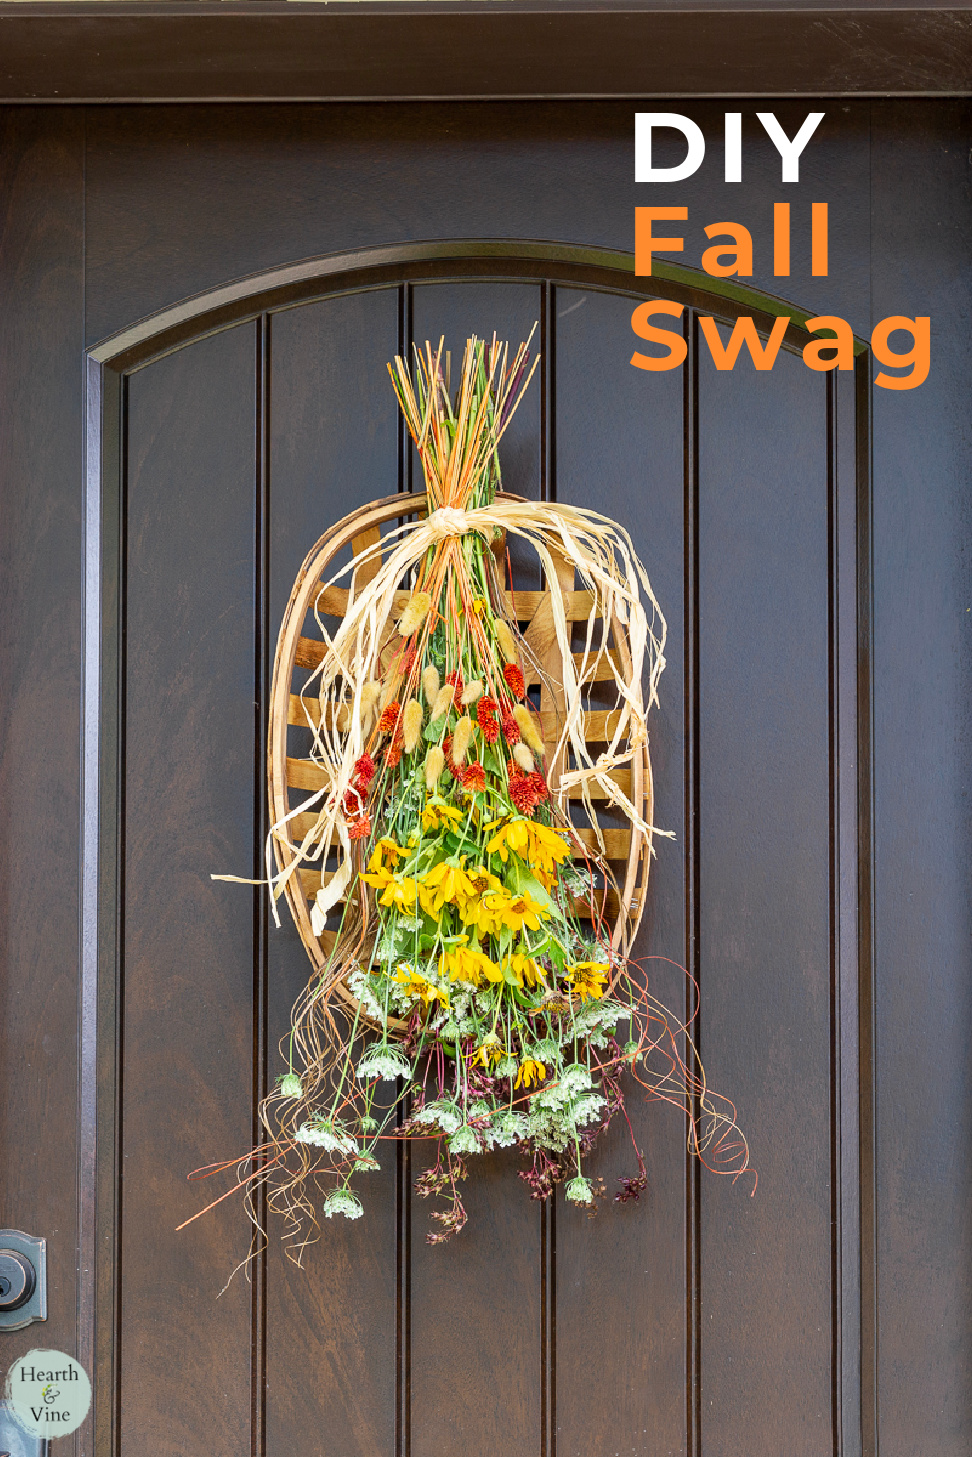 Fall swag tied to a tobacco basket hanging on the front door.